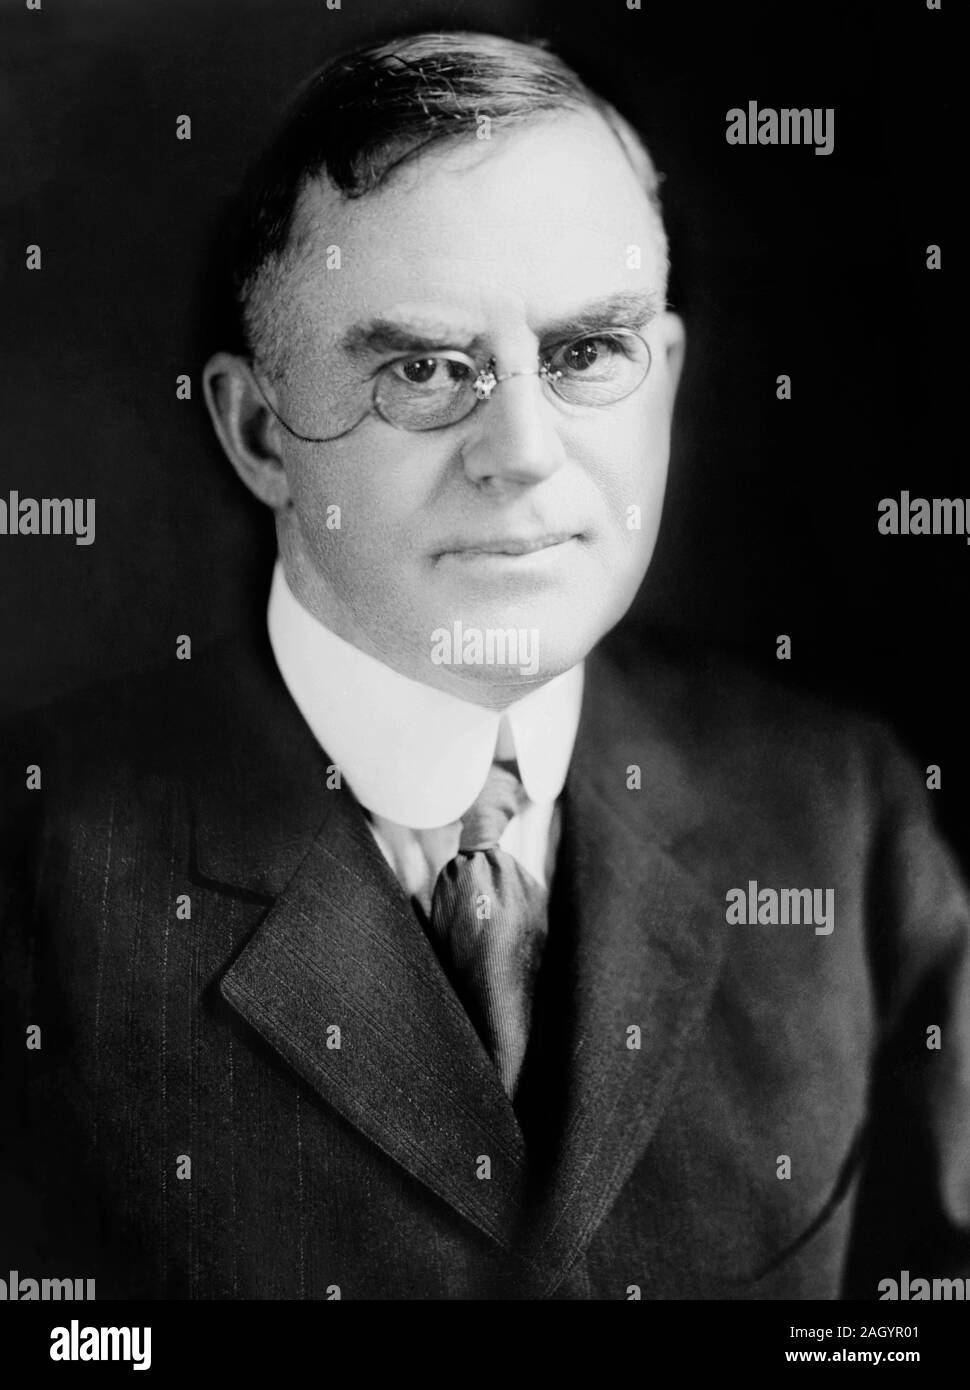 H.C. Wallace - Henry Cantwell 'Harry' Wallace (May 11, 1866 – October 25, 1924) was an American farmer, journalist, and political activist who served as the Secretary of Agriculture from 1921 to 1924. He was the father of Henry A. Wallace, who would follow in his footsteps as Secretary of Agriculture and later became Vice President under President Franklin D. Roosevelt. Stock Photo